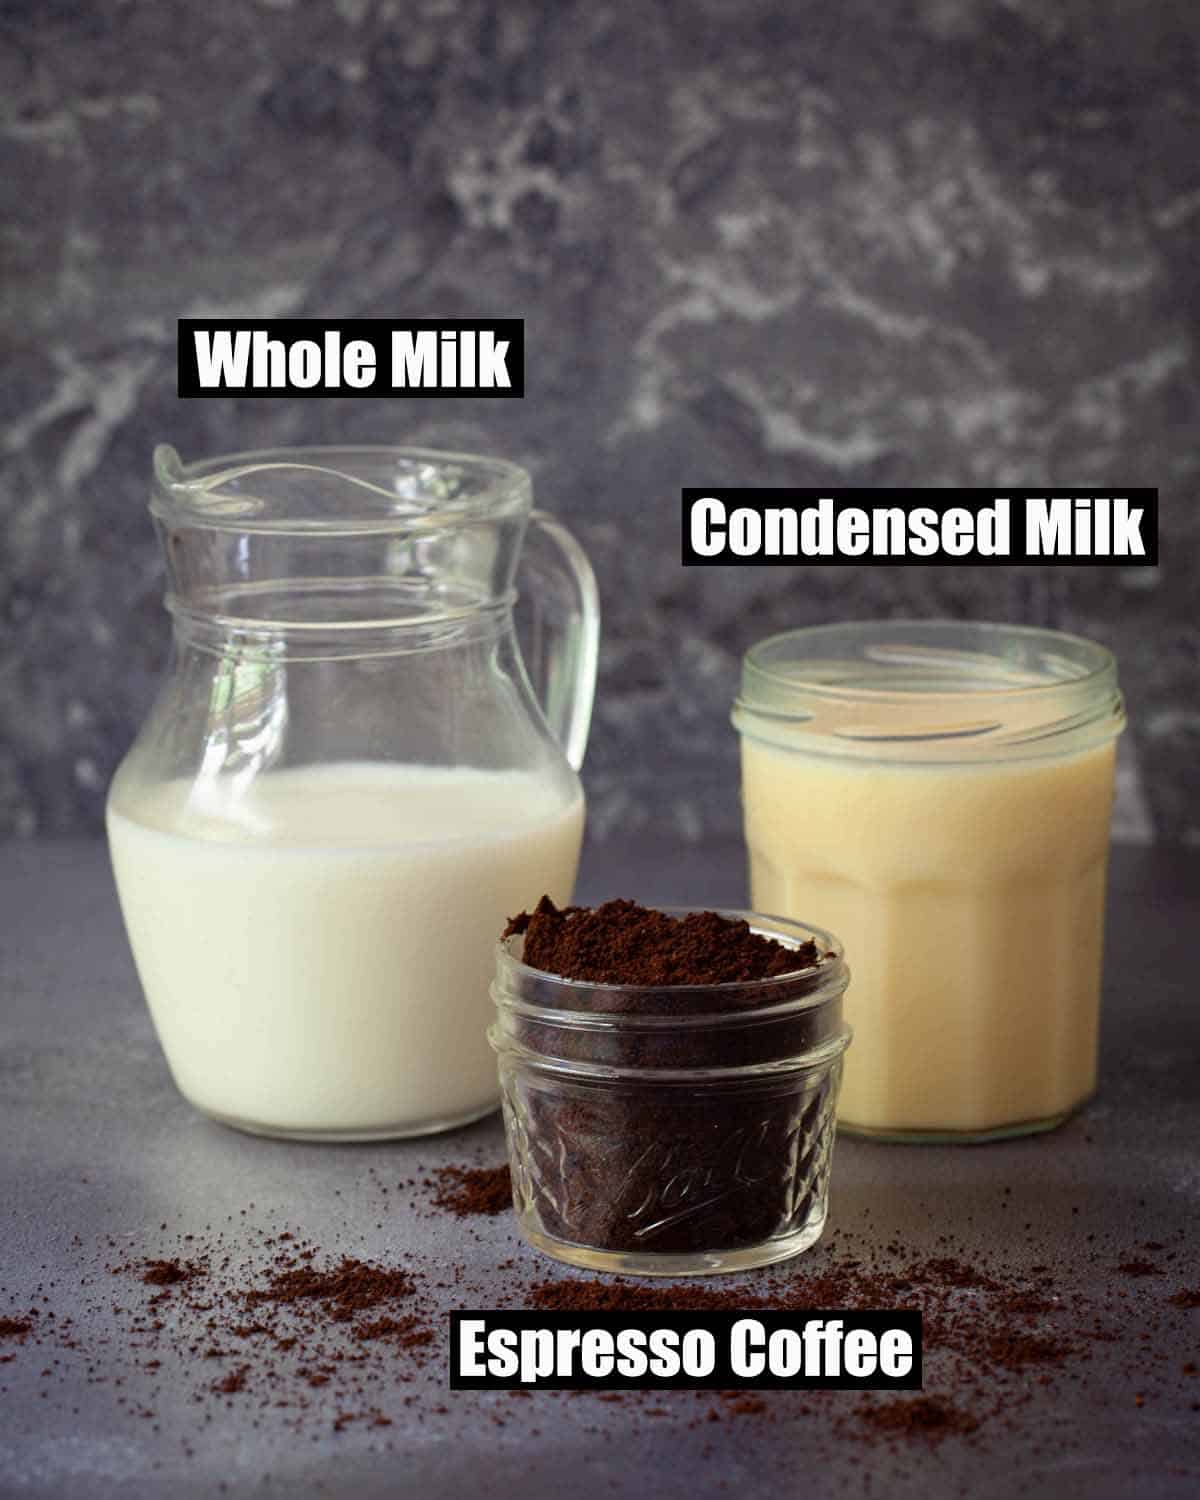 Labelled ingredients for café con leche drink.